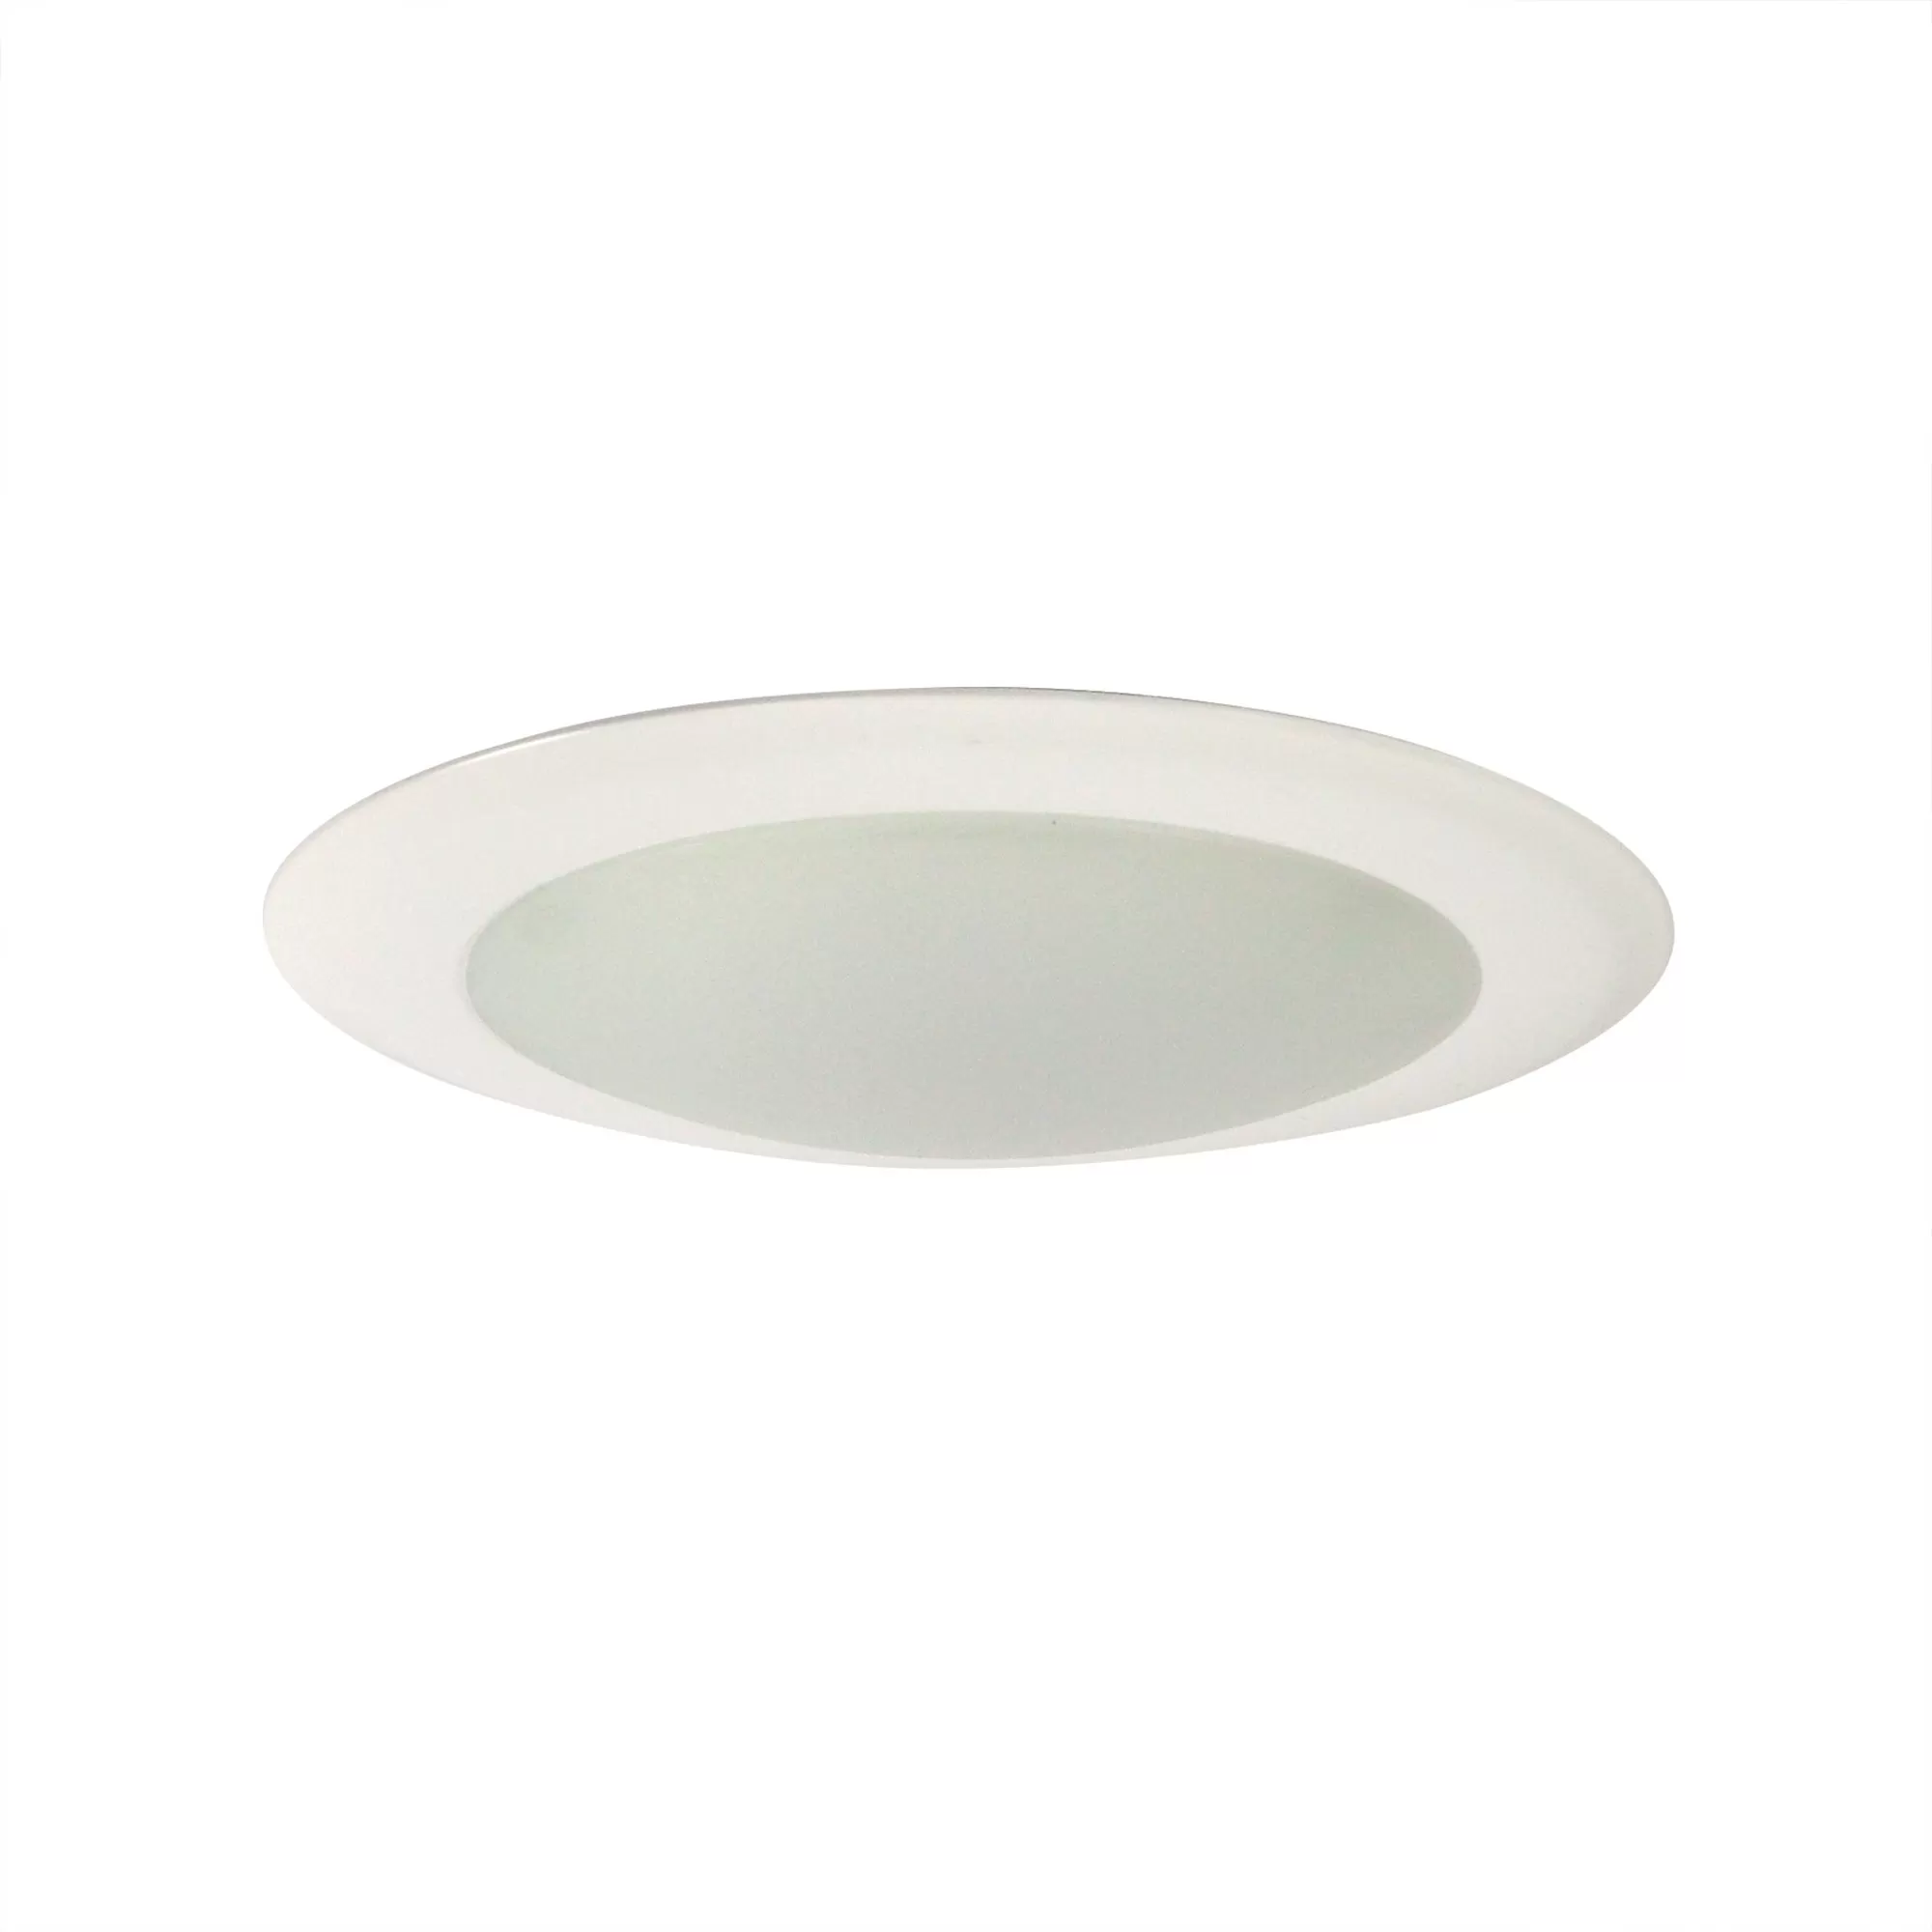 NORL NLOPAC-R6509T2430W 6" SURFACE MOUNT DISK LIGHT LED 3000K WHITE